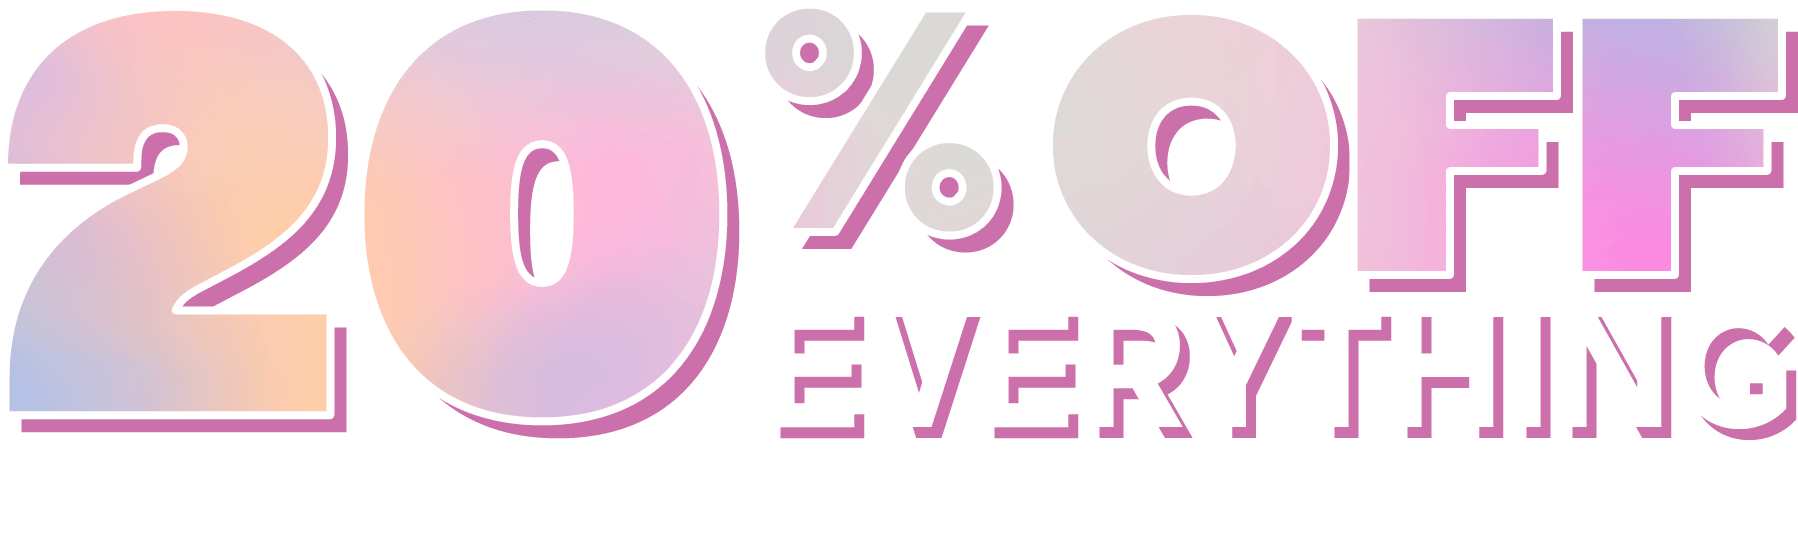 20% Off Everything in the Del Yeah! Rewards App